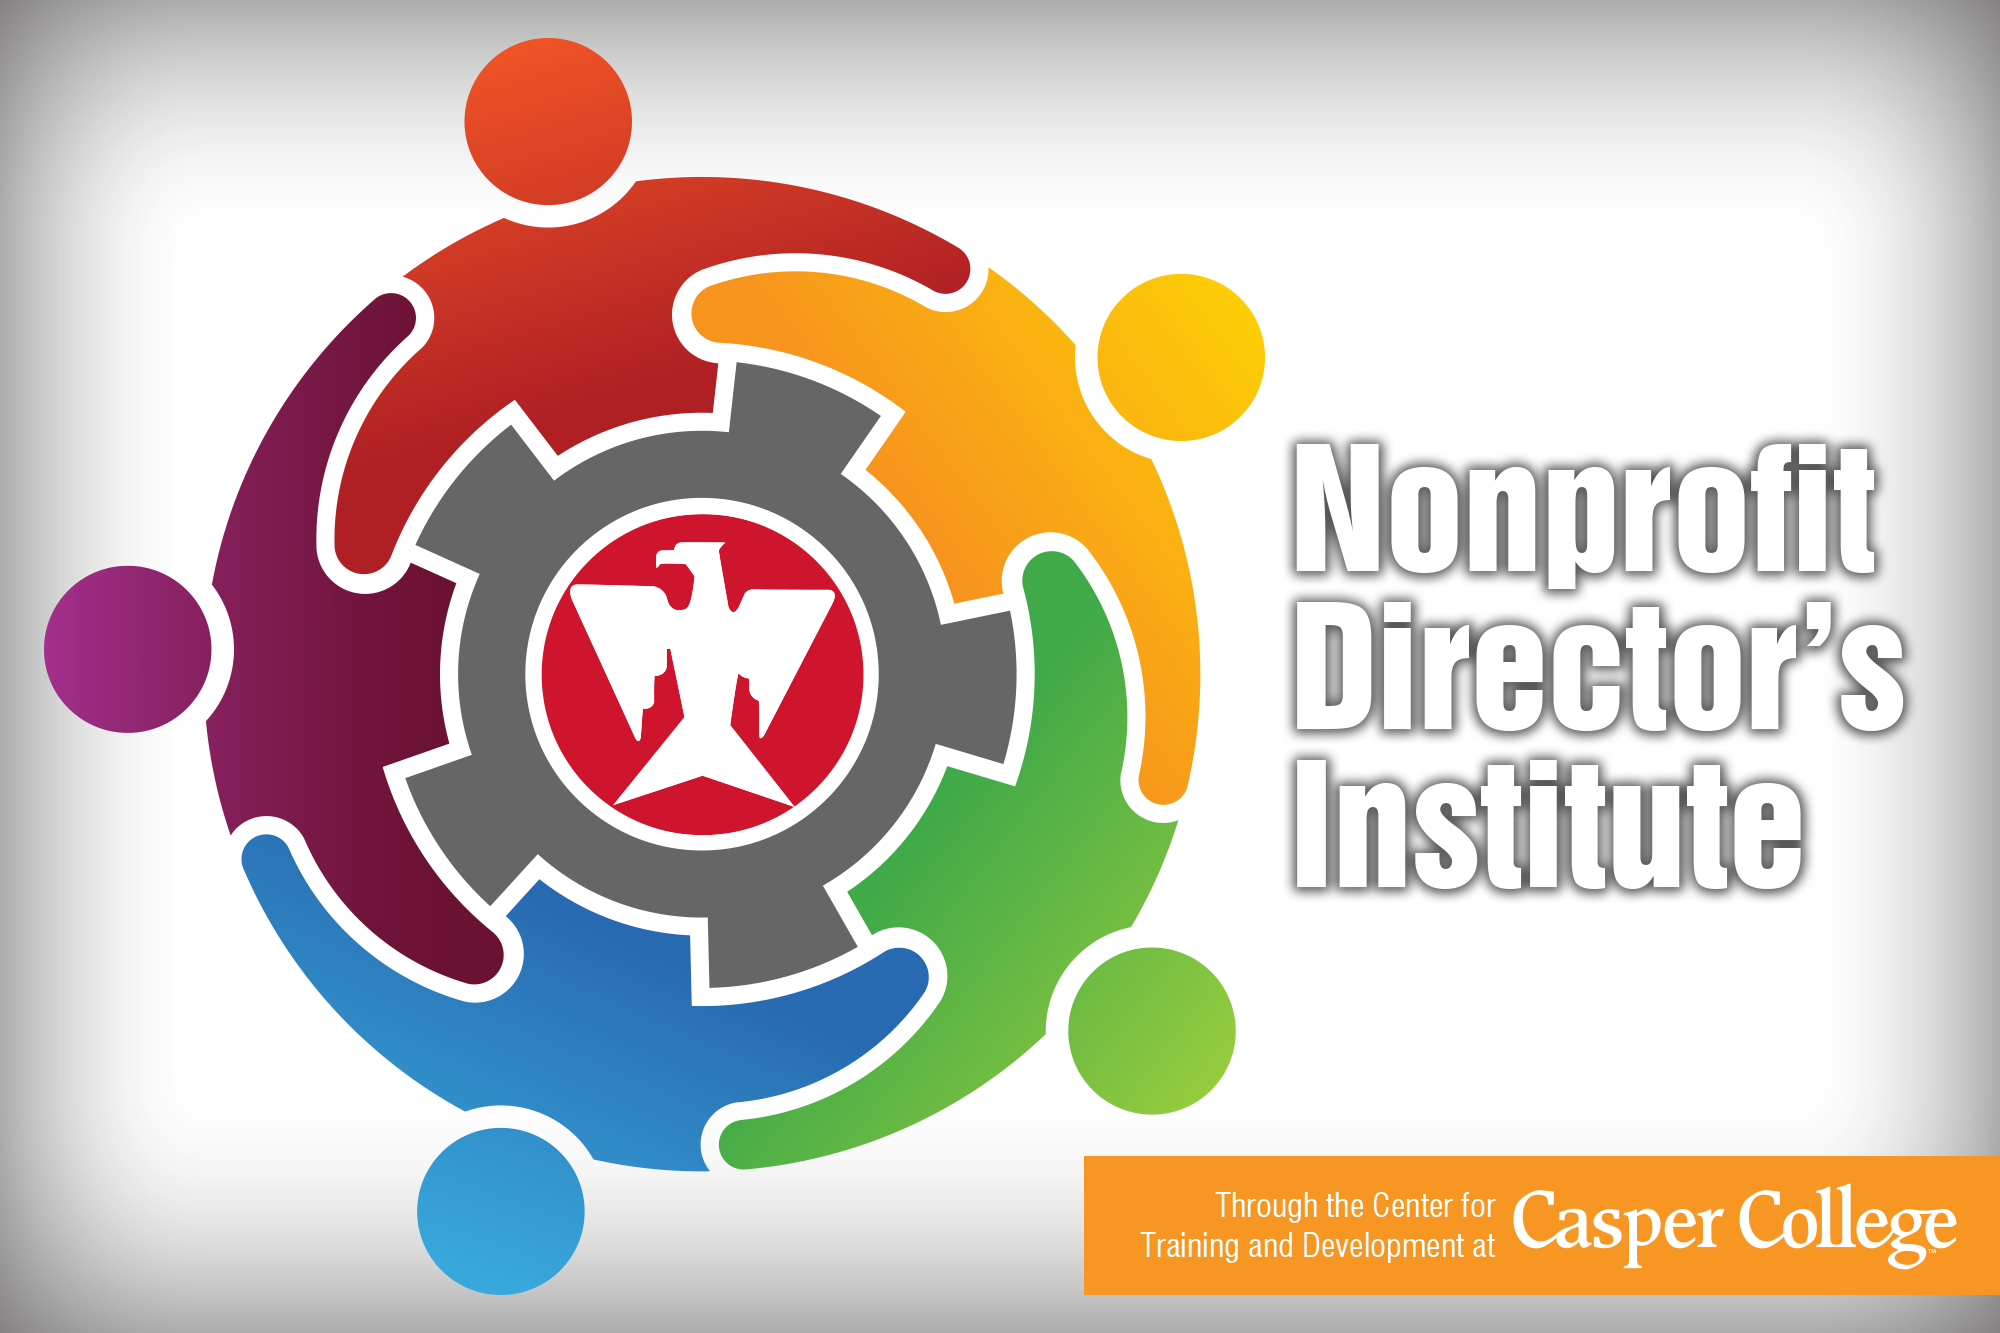 Abstract design with the words Nonprofit Director's Institute